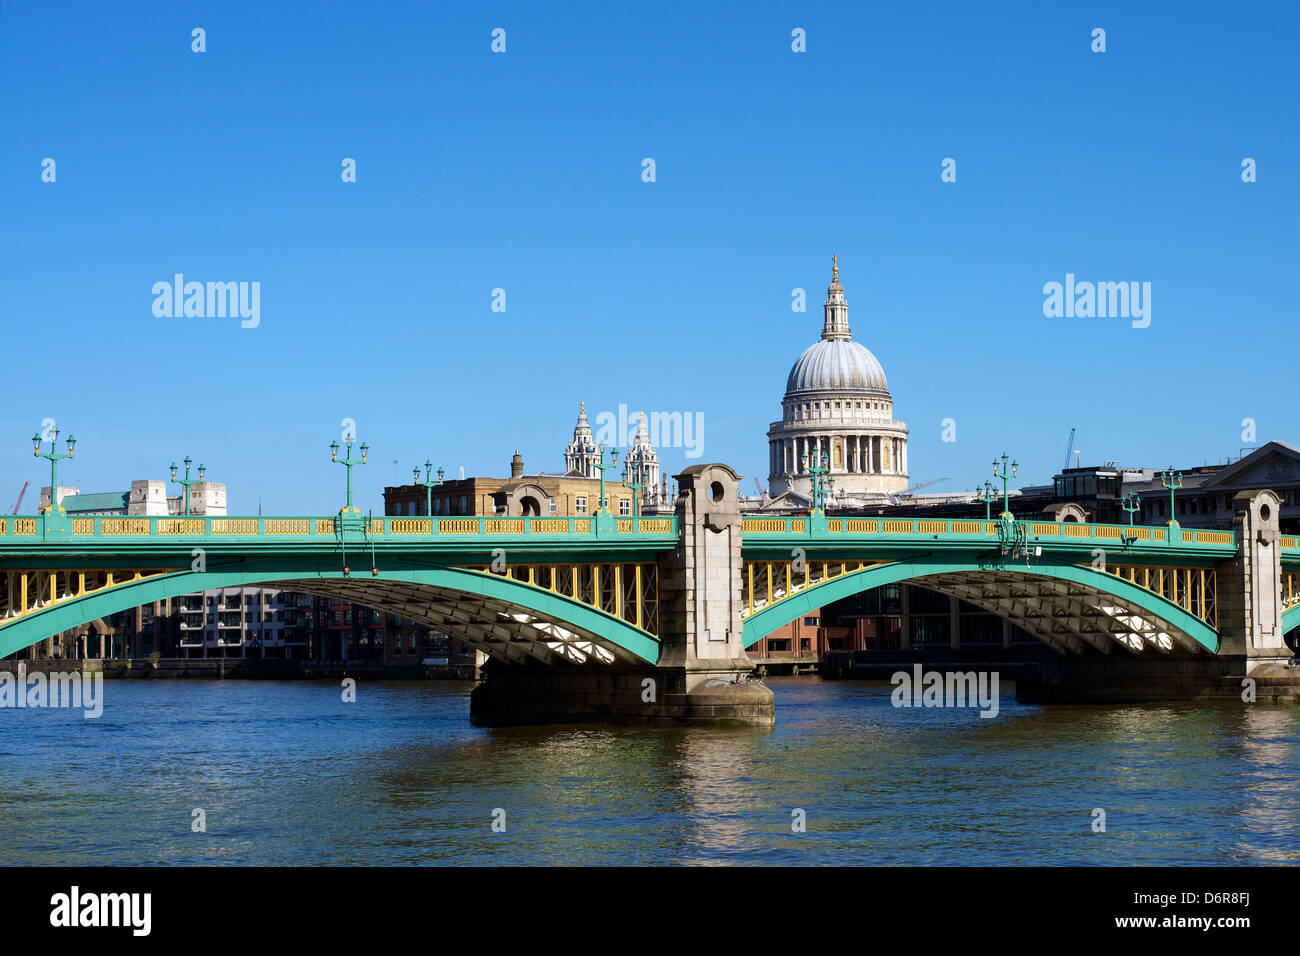 Pillars supports and arches of Southwark Bridge in London set against a clear blue sky with St Paul's Cathedral in the distance Stock Photo